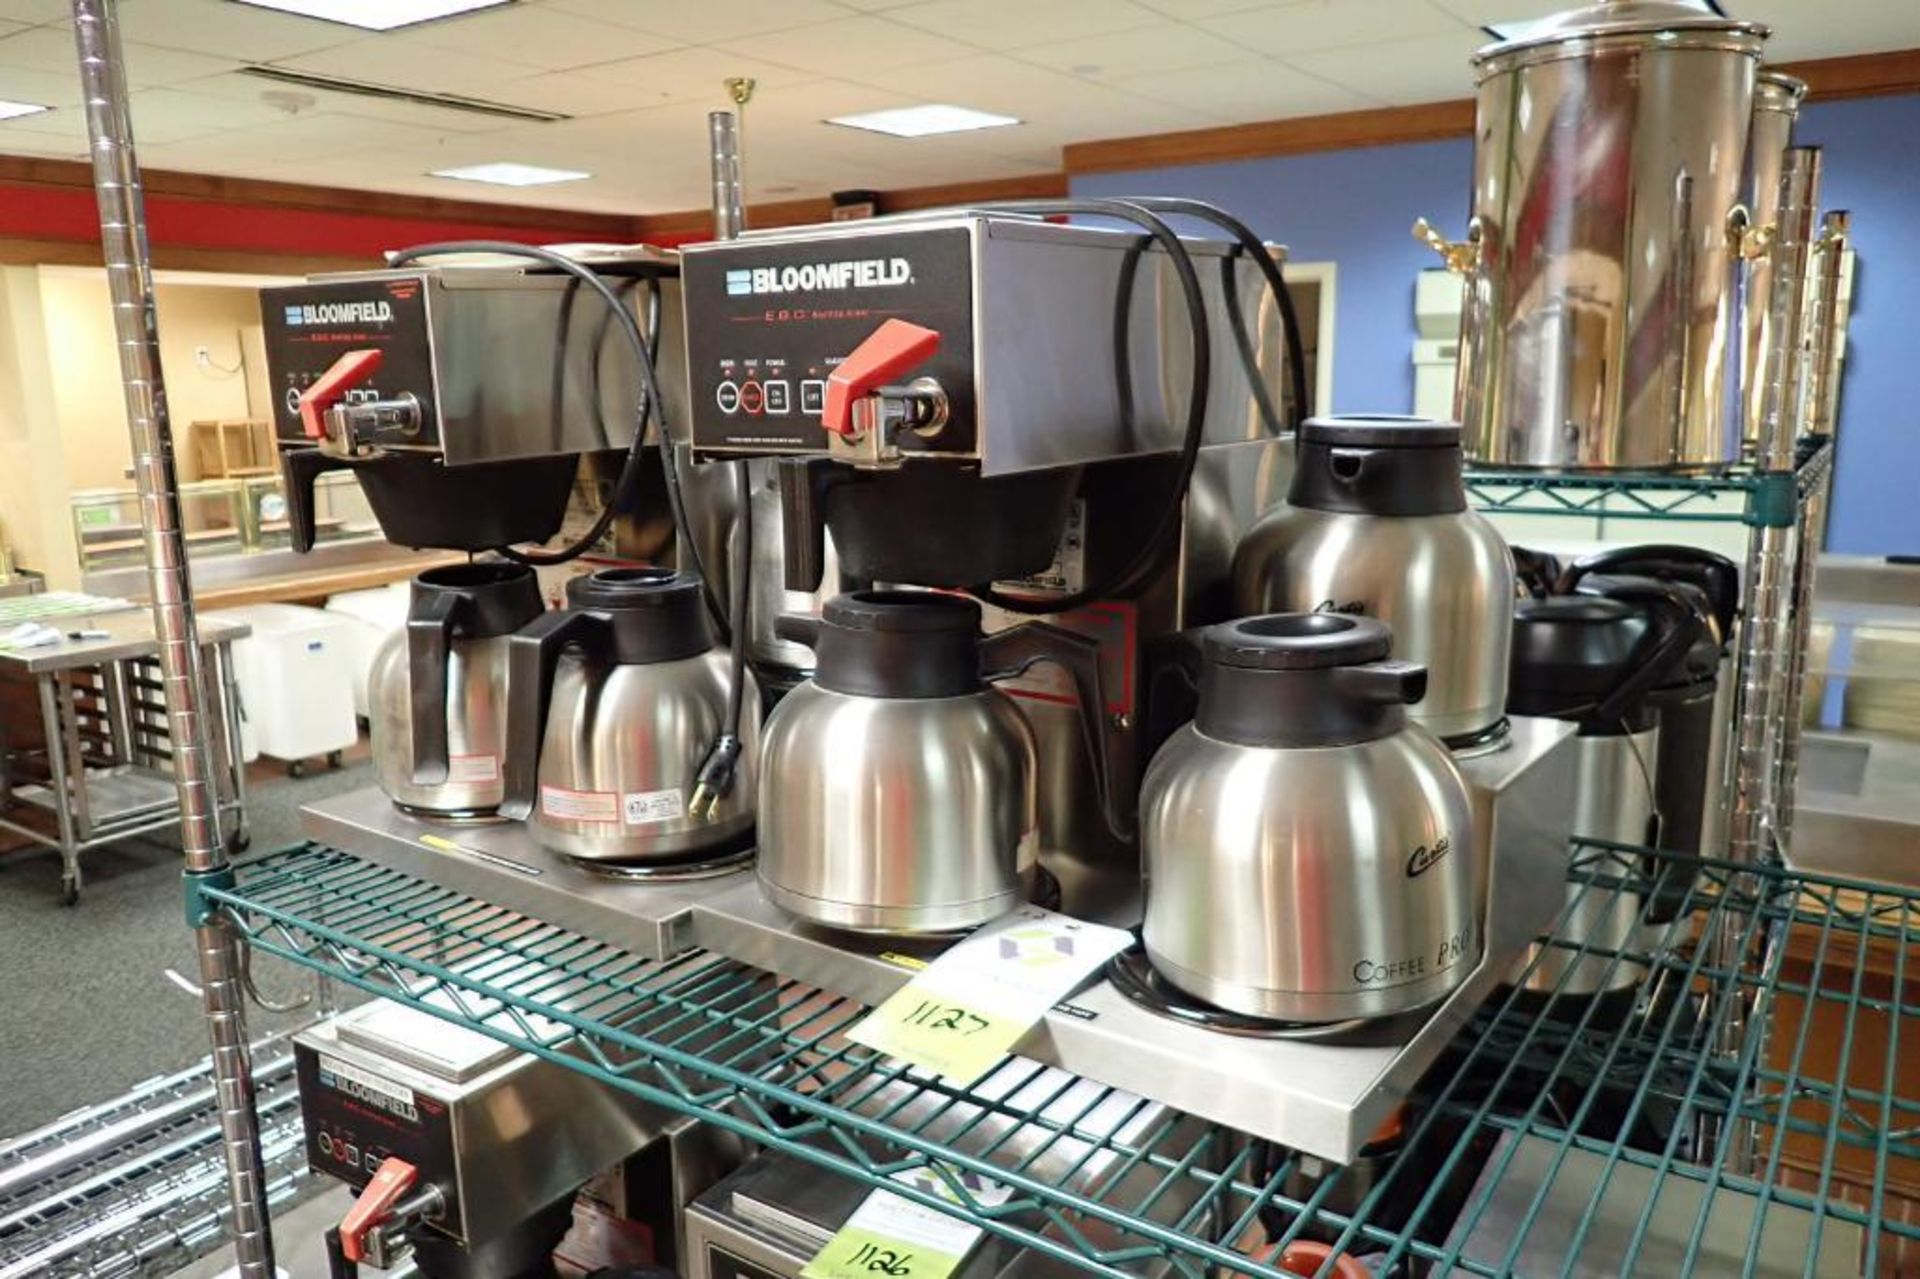 Bloomfield coffee maker with 2 coffee pots - Image 5 of 5